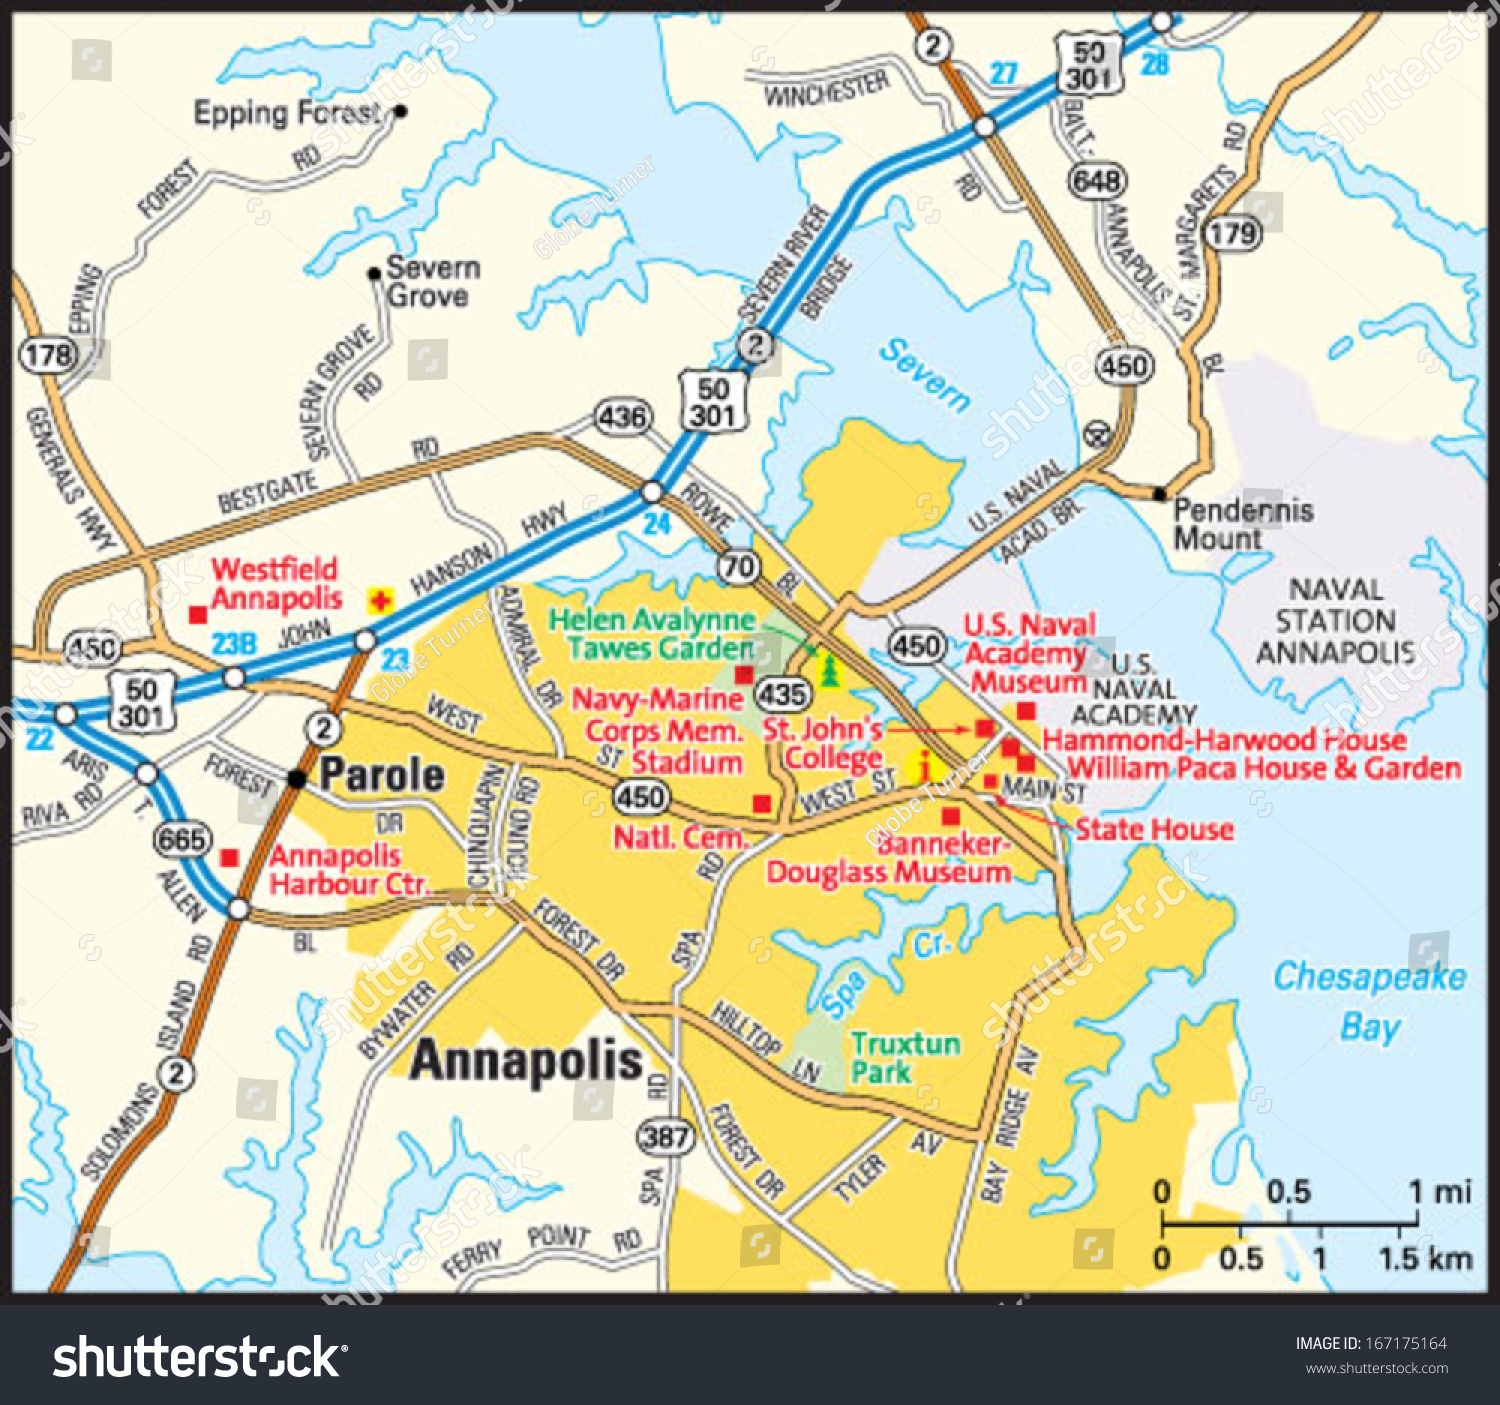 map of annapolis maryland Annapolis Maryland Area Map Stock Vector Royalty Free 167175164 map of annapolis maryland